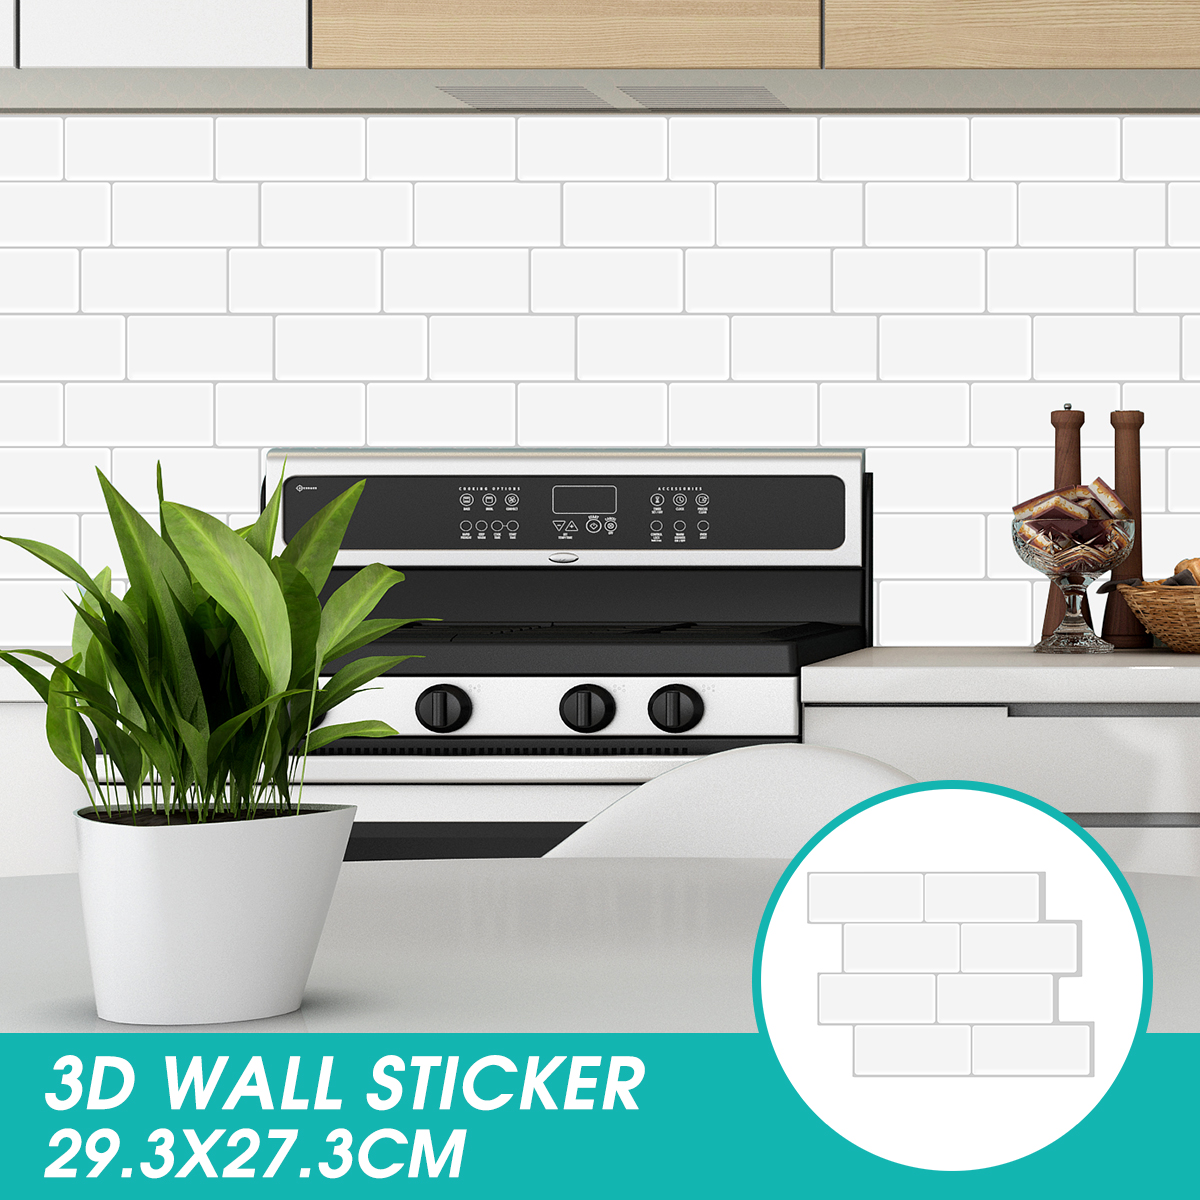 3D-Tile-Wall-Sticker-White-Self-Adhesive-Decal-Home-Kitchen-Bathroom-Mural-Decoration-1802618-1